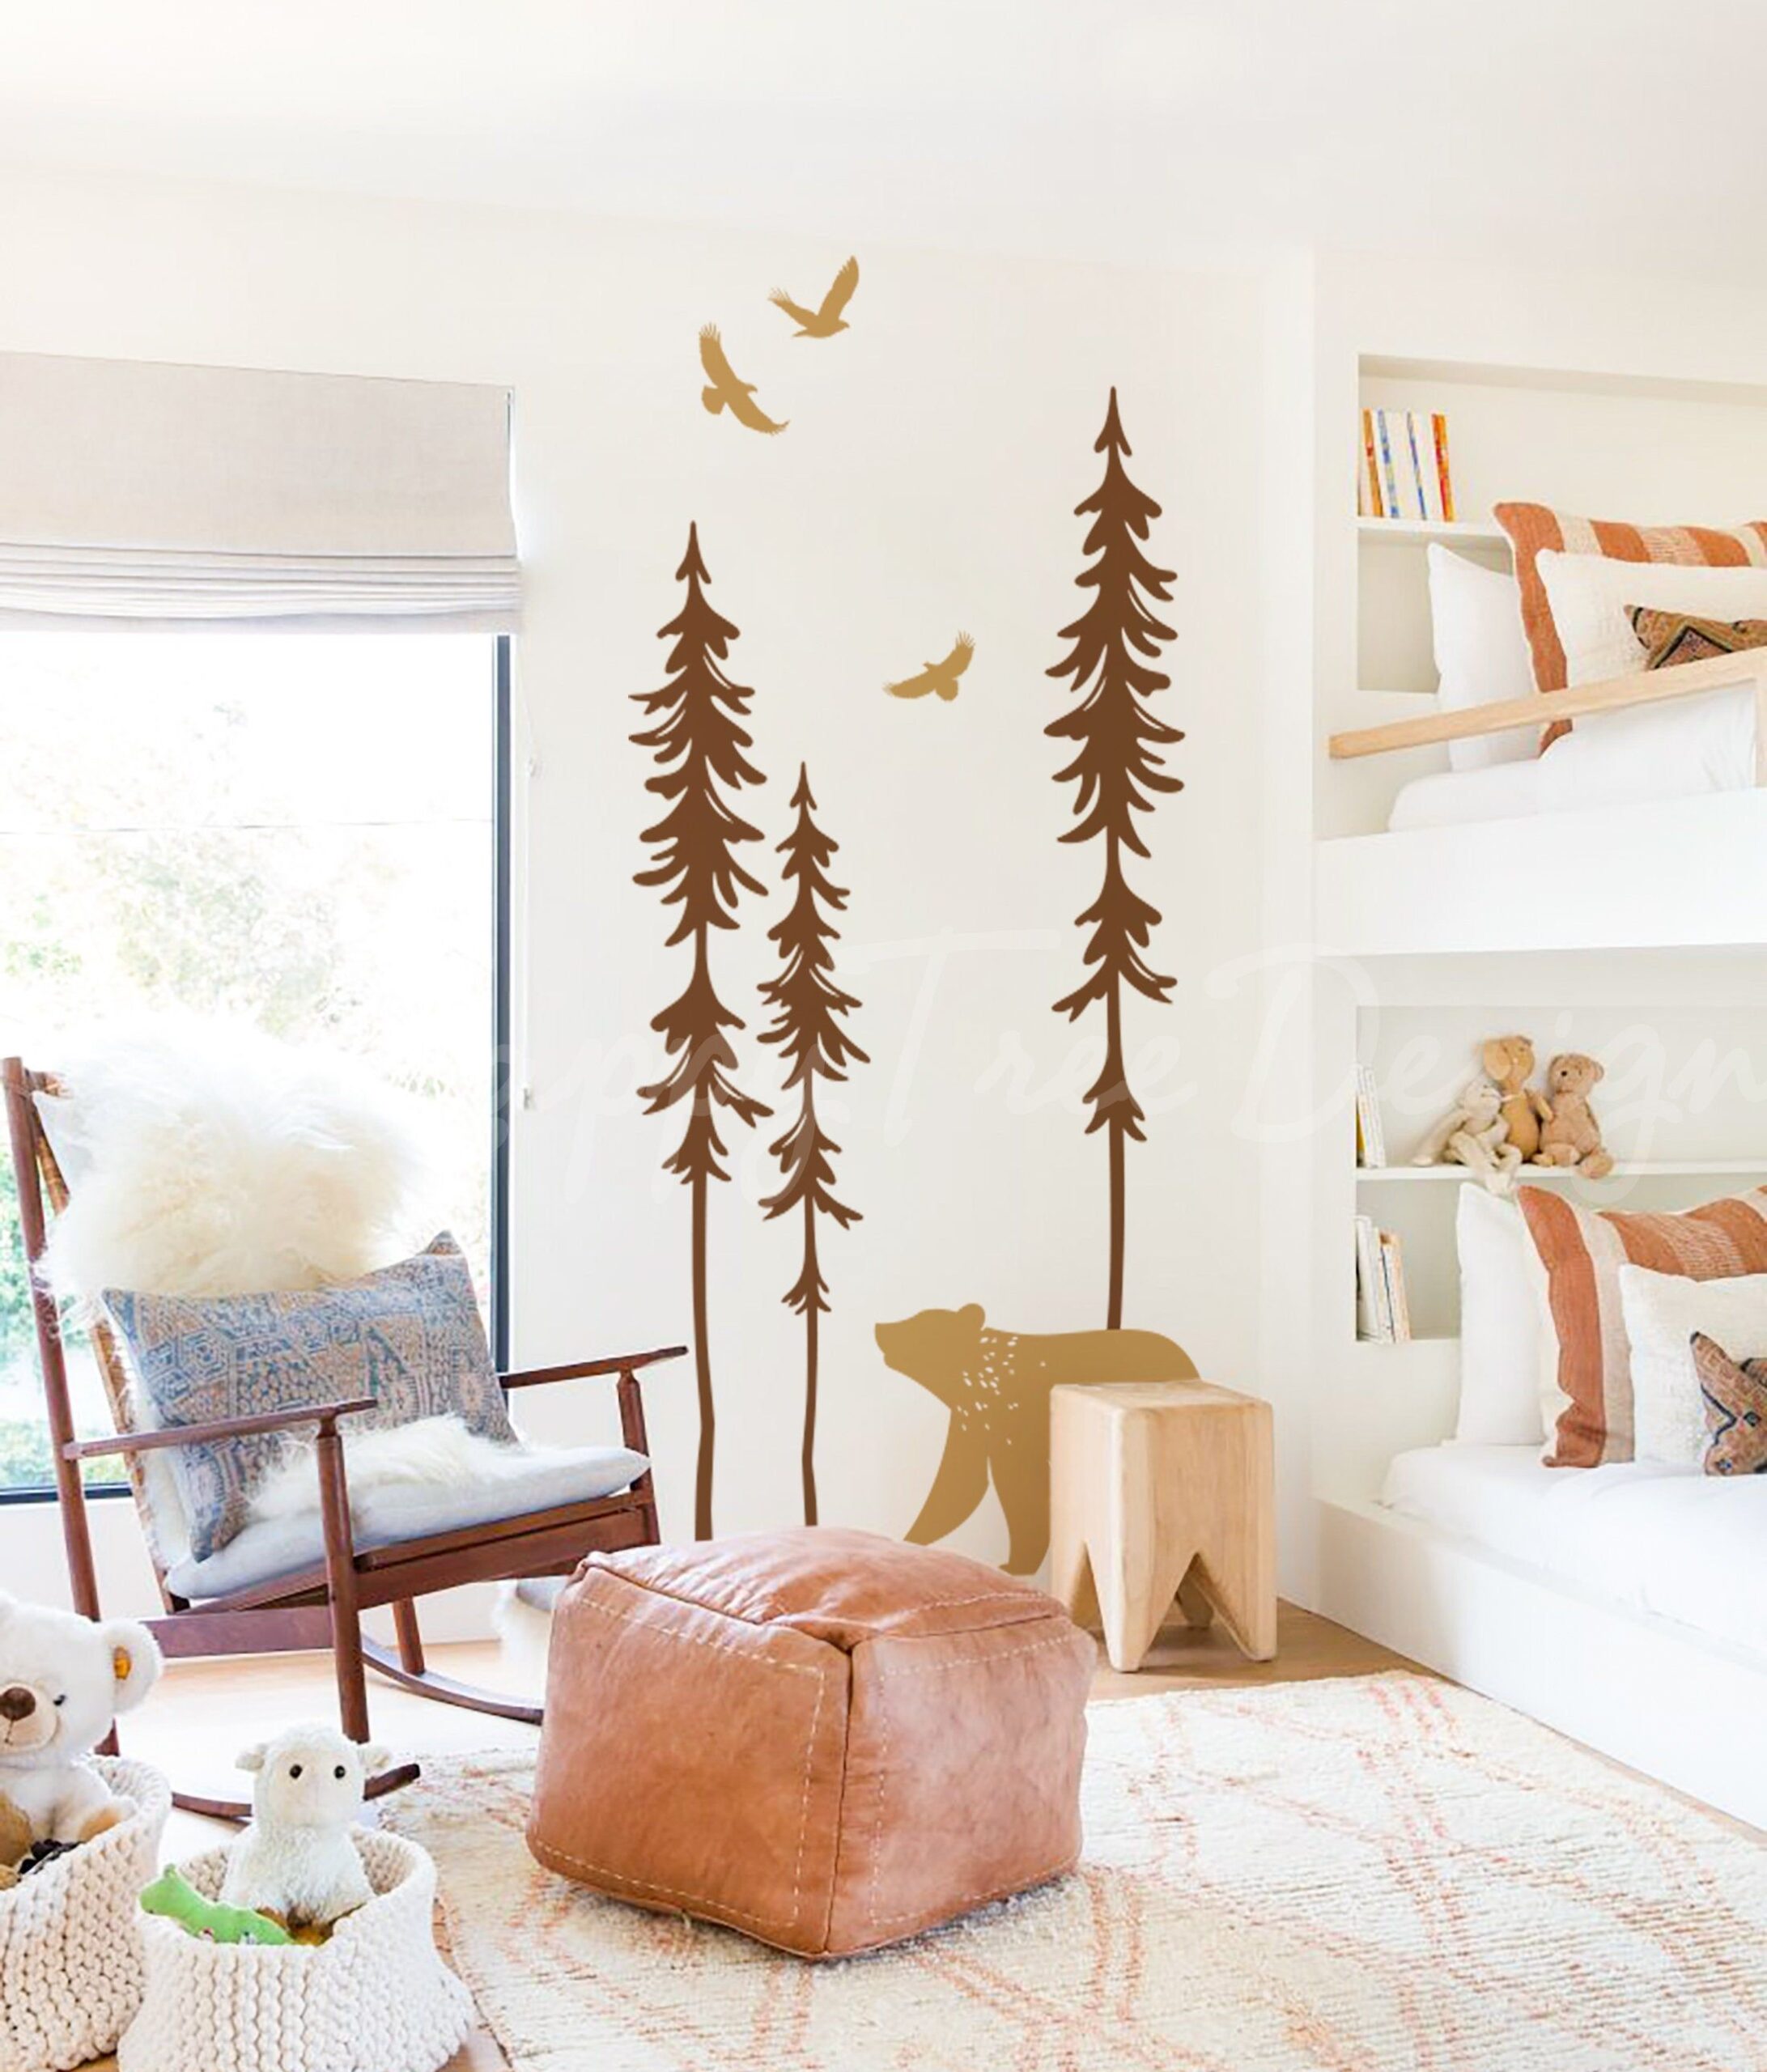 Tree Wall Decal for a Place that Has no  Trees